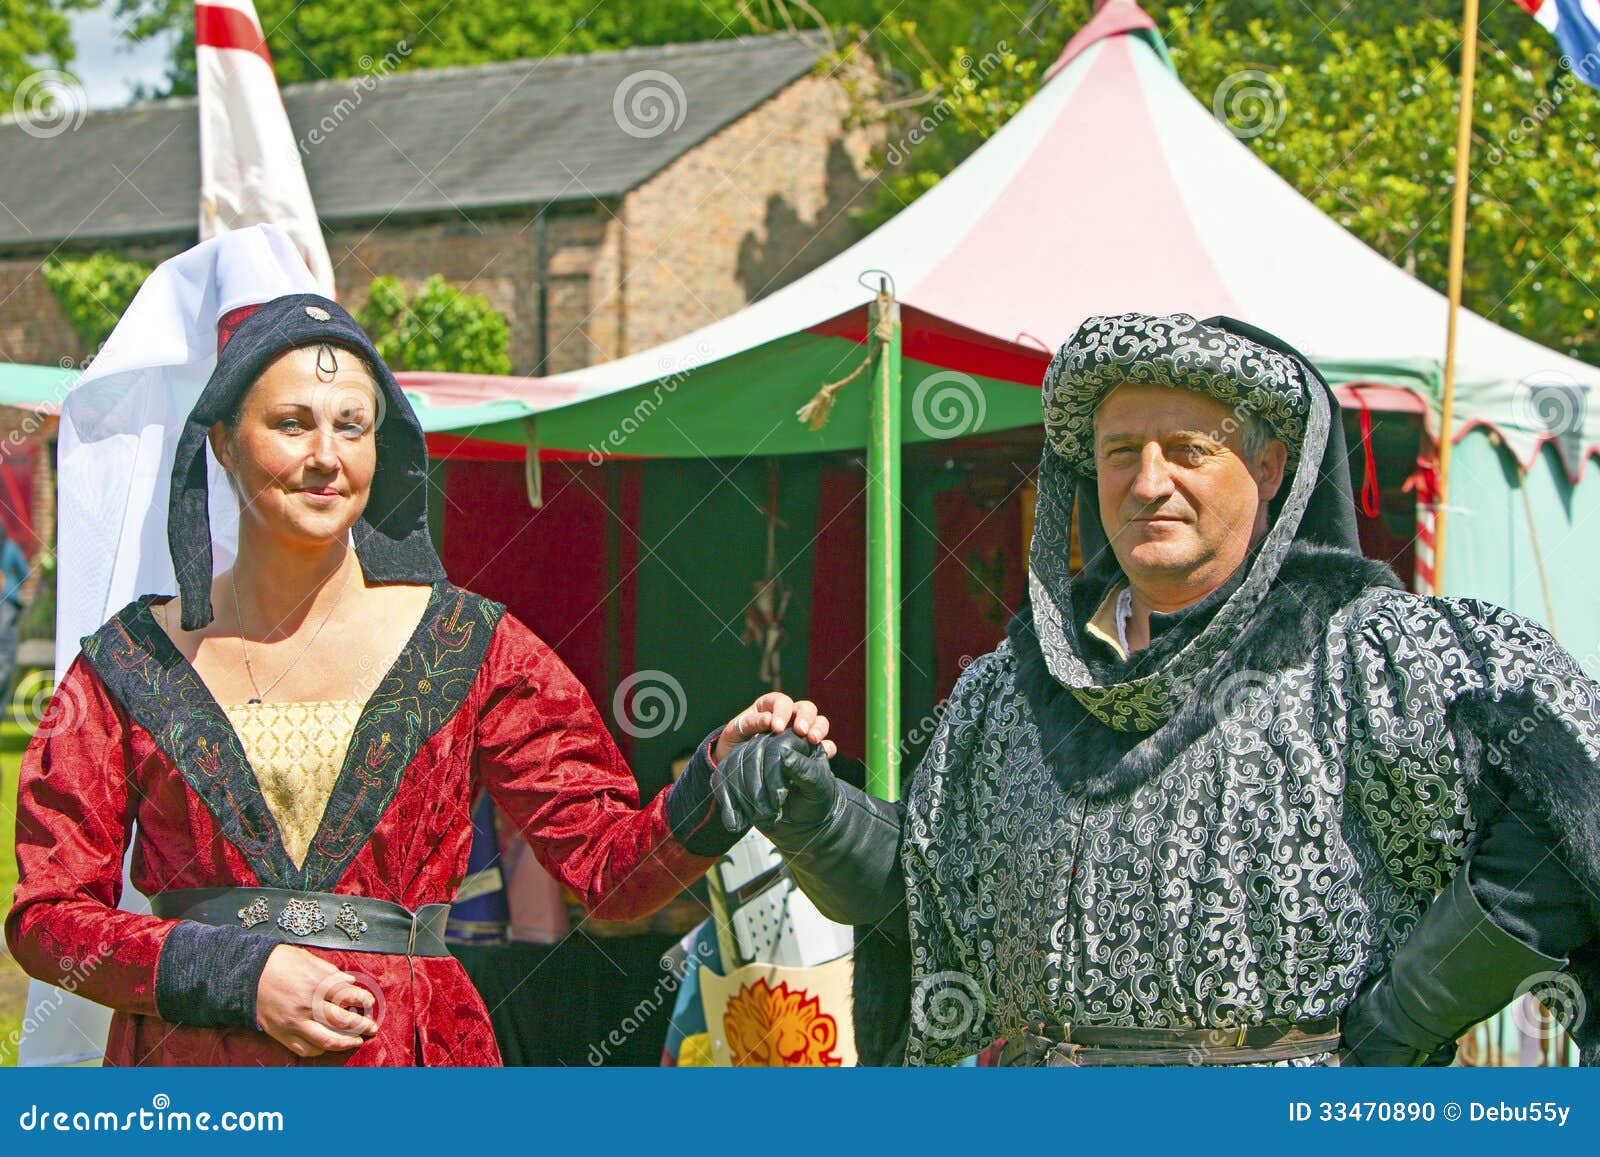 Man and Young Woman in Medieval Costume. Editorial Image - Image of ...